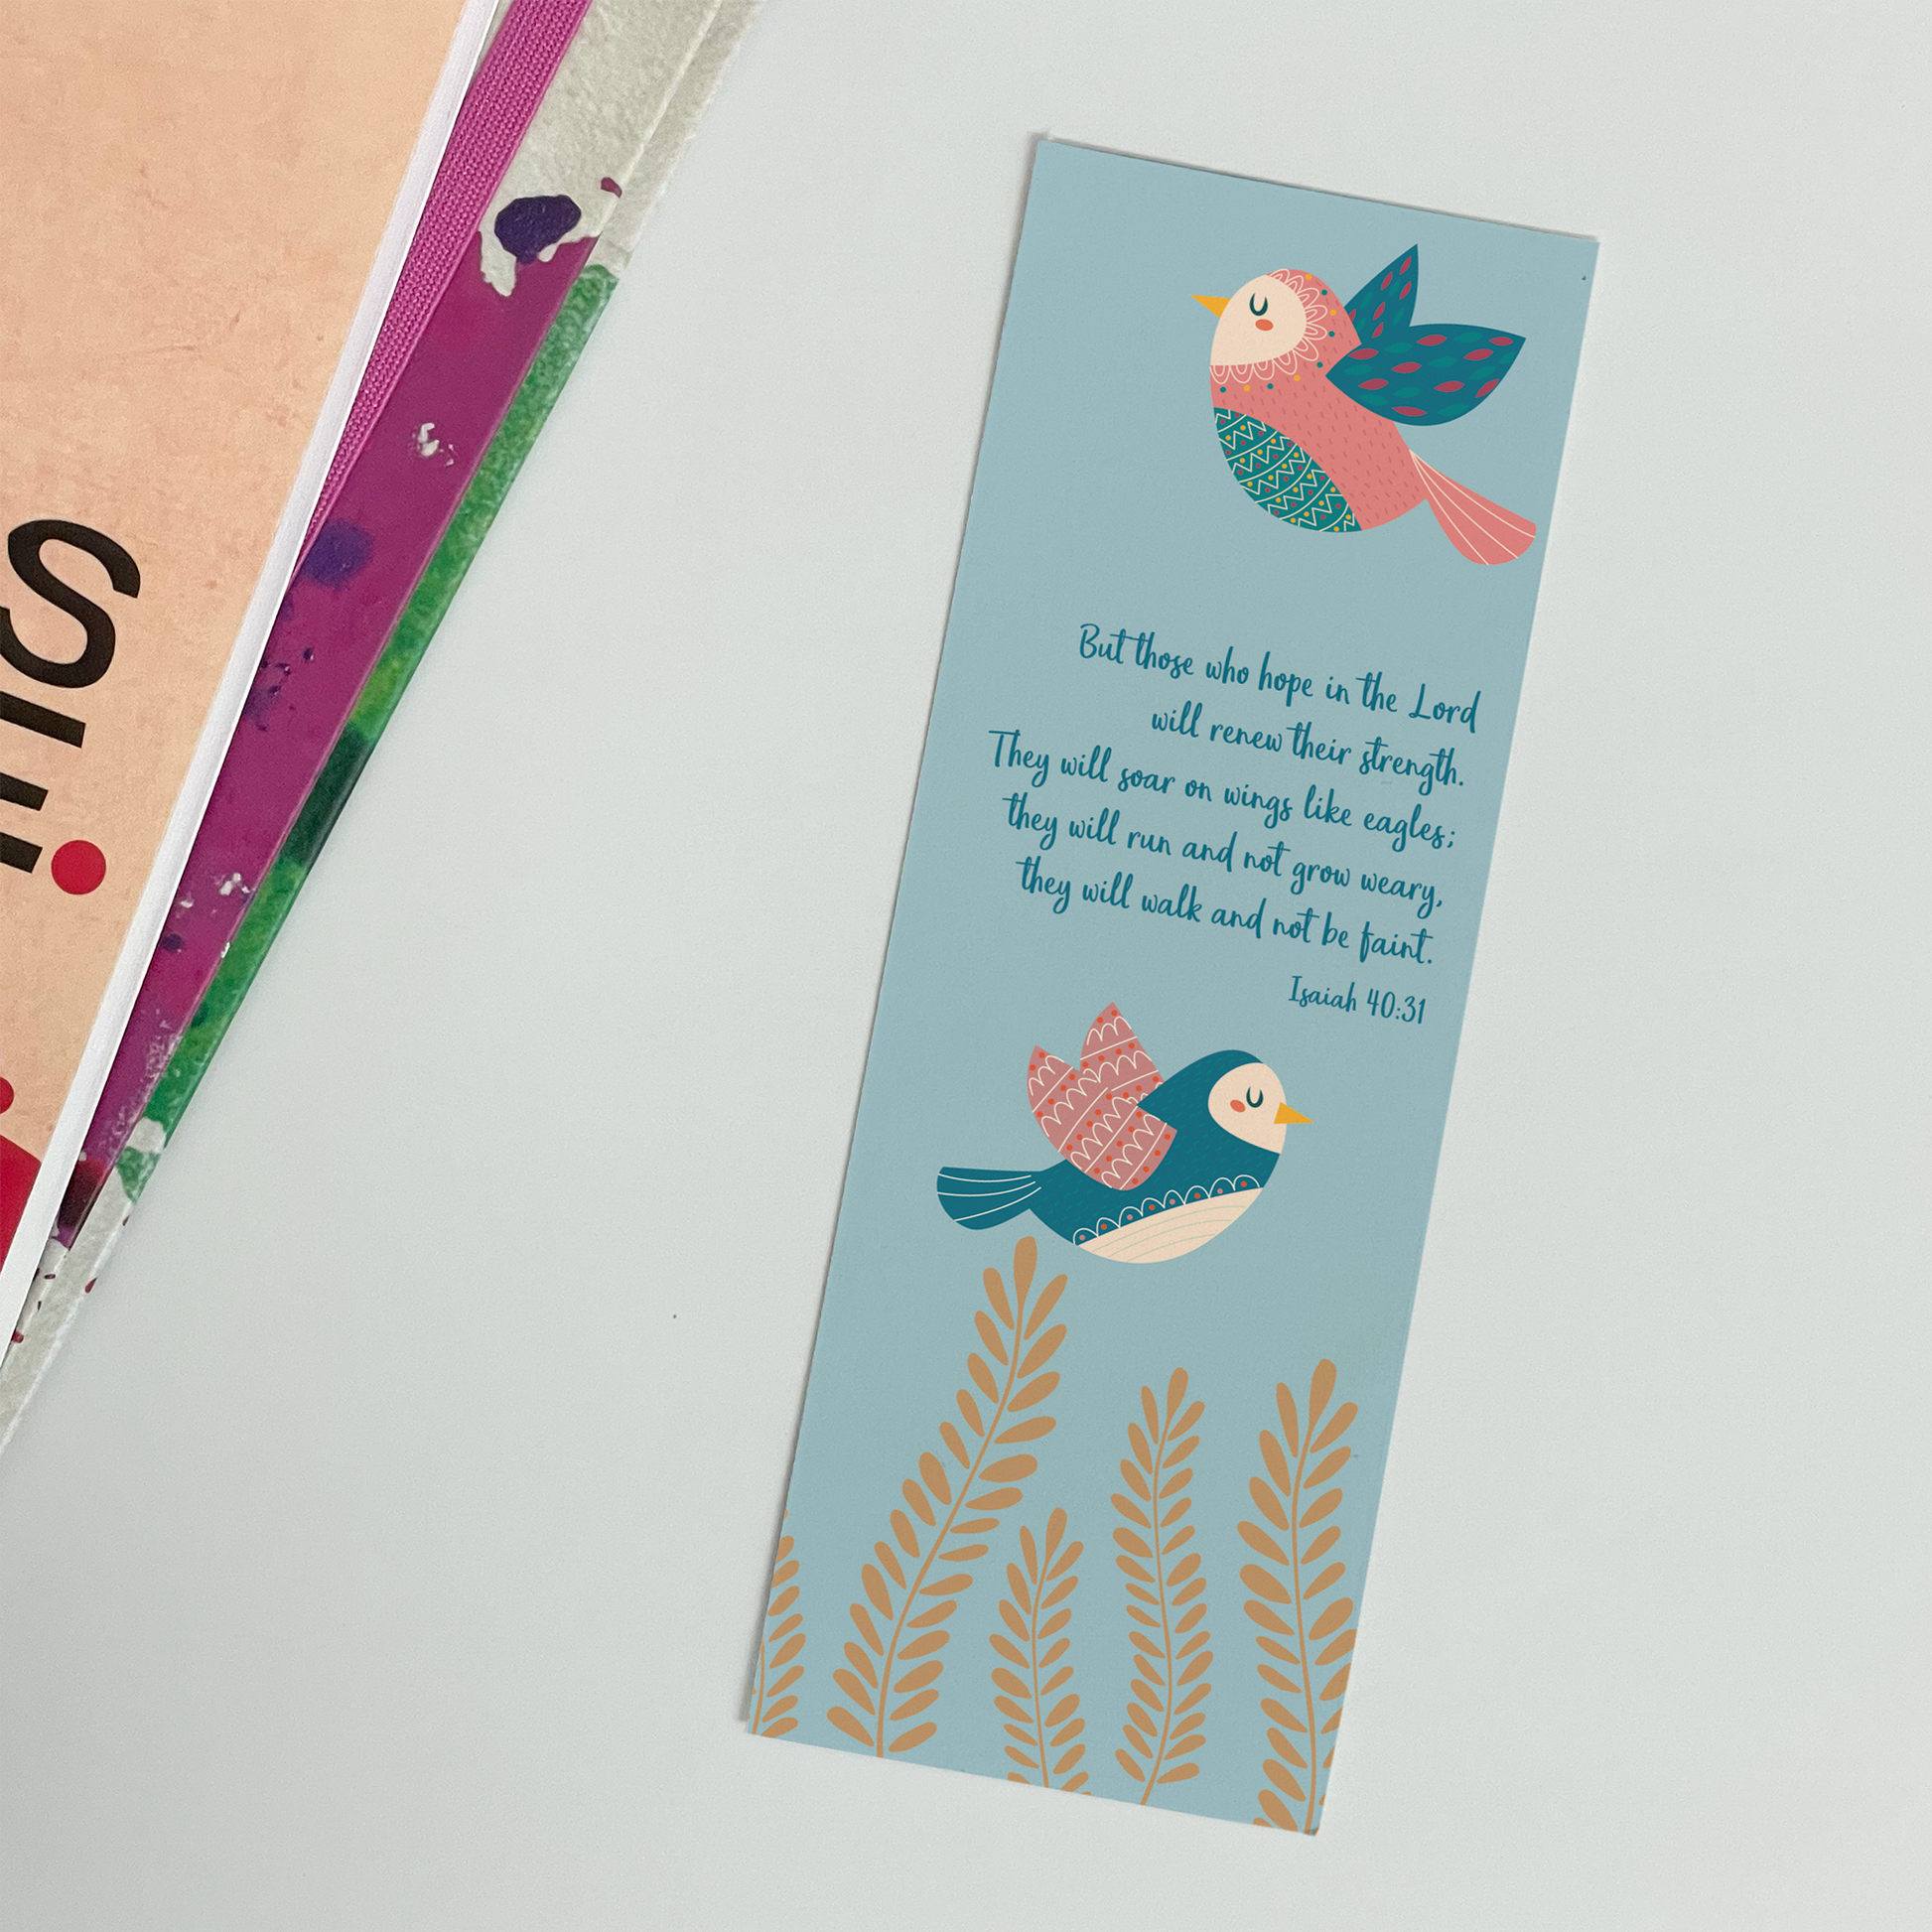 CHRISTIAN BOOKMARK GIFT - ISAIAH 40:31 - THE WEE SPARROW